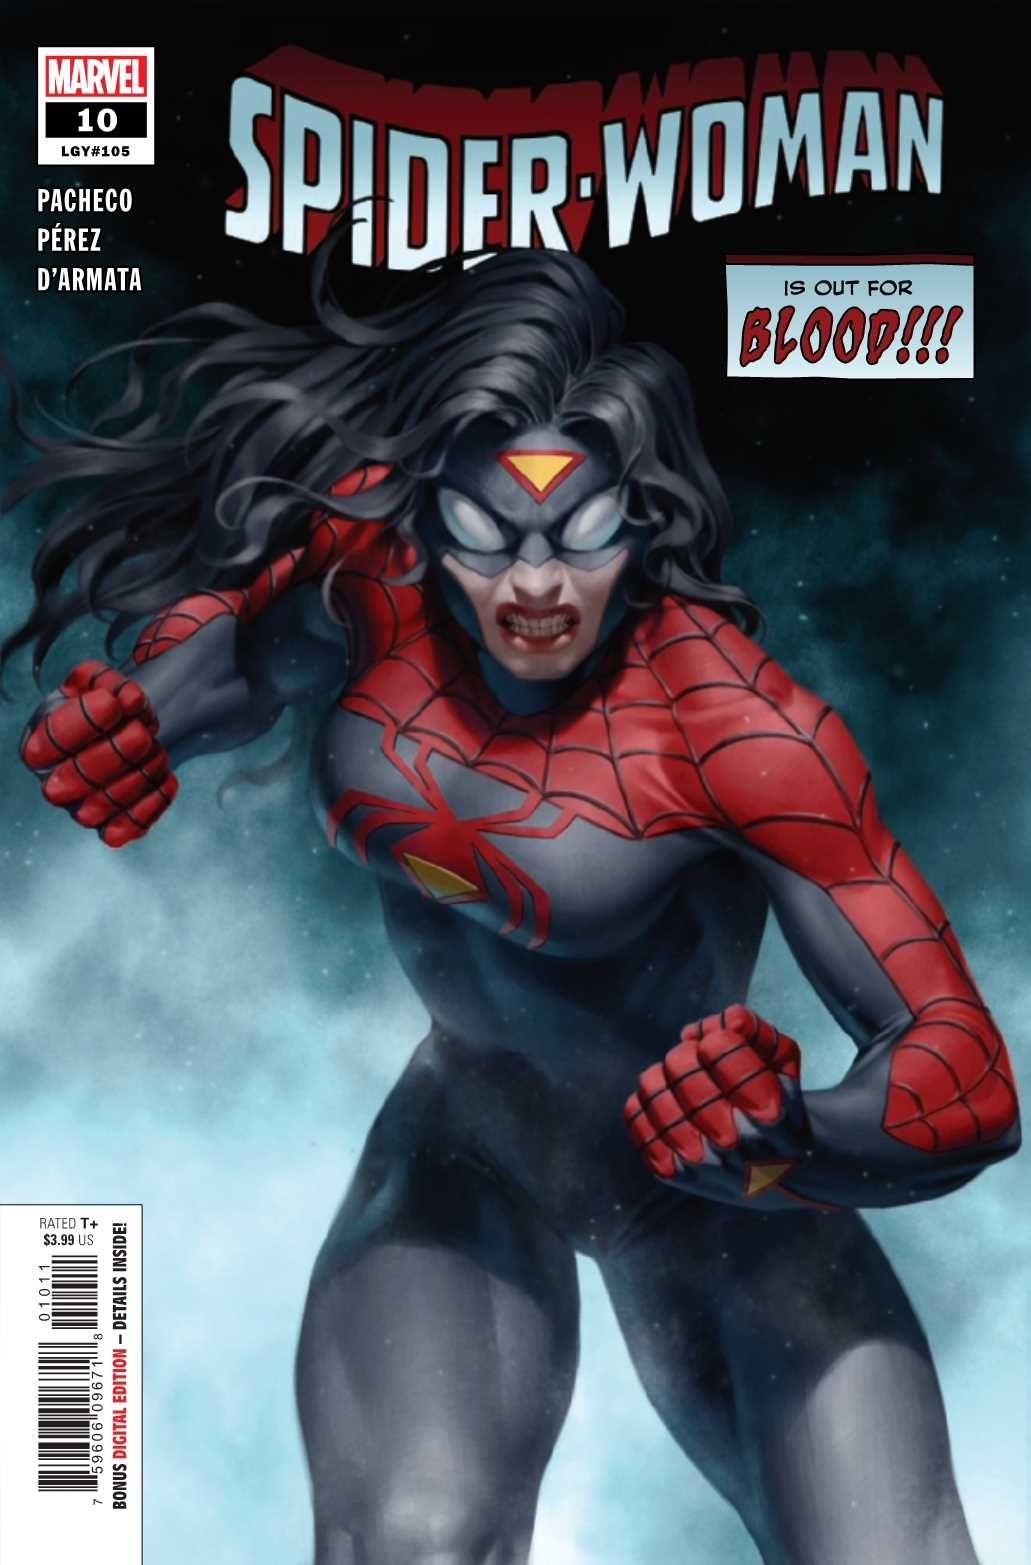 SpiderWoman Unleashes Her Powers in Her Most Brutal Battle Ever